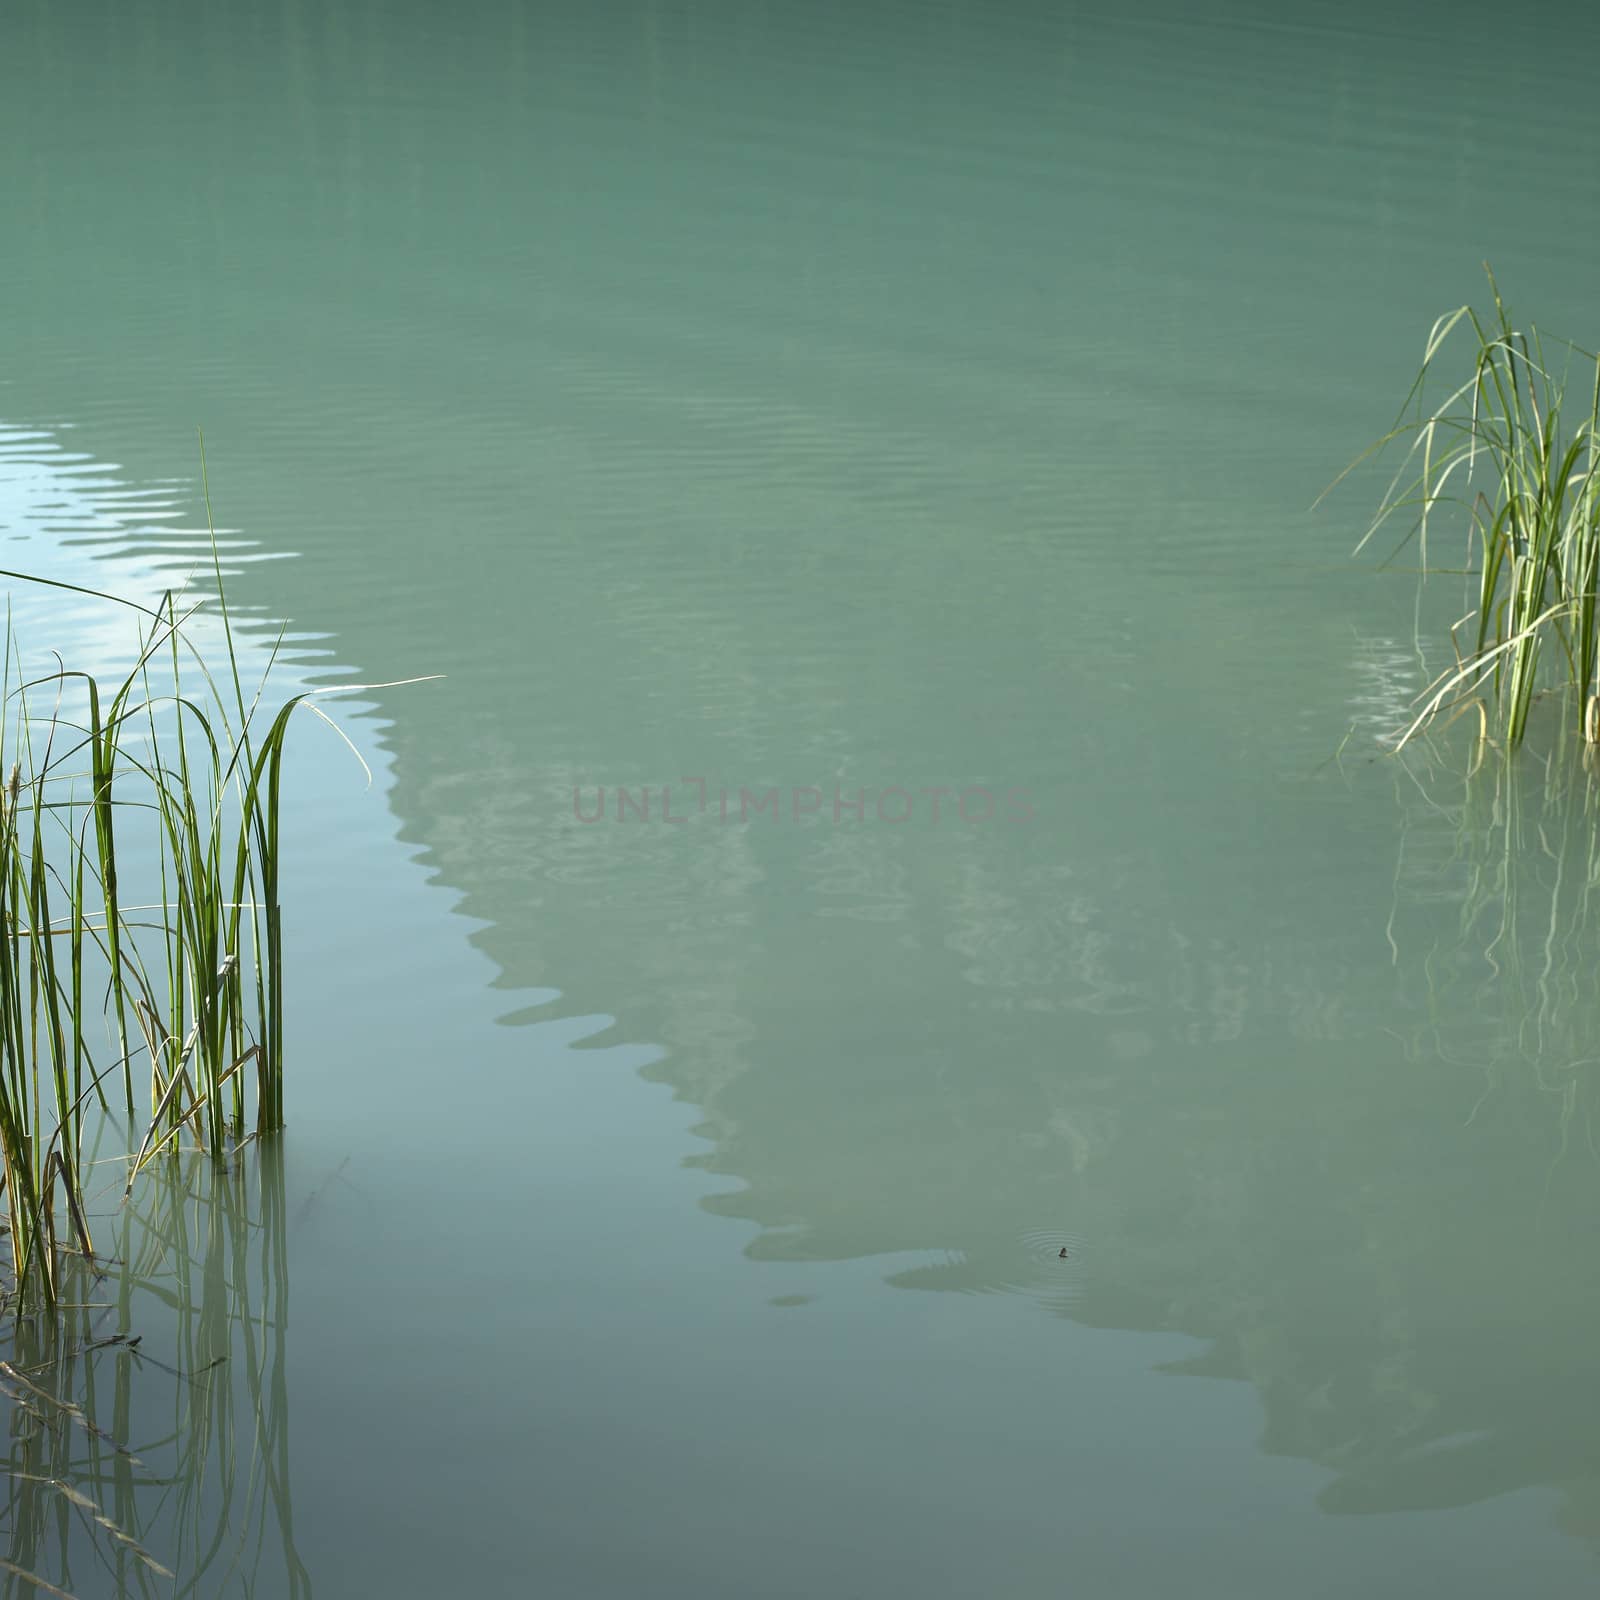 Grass in lake by mmm